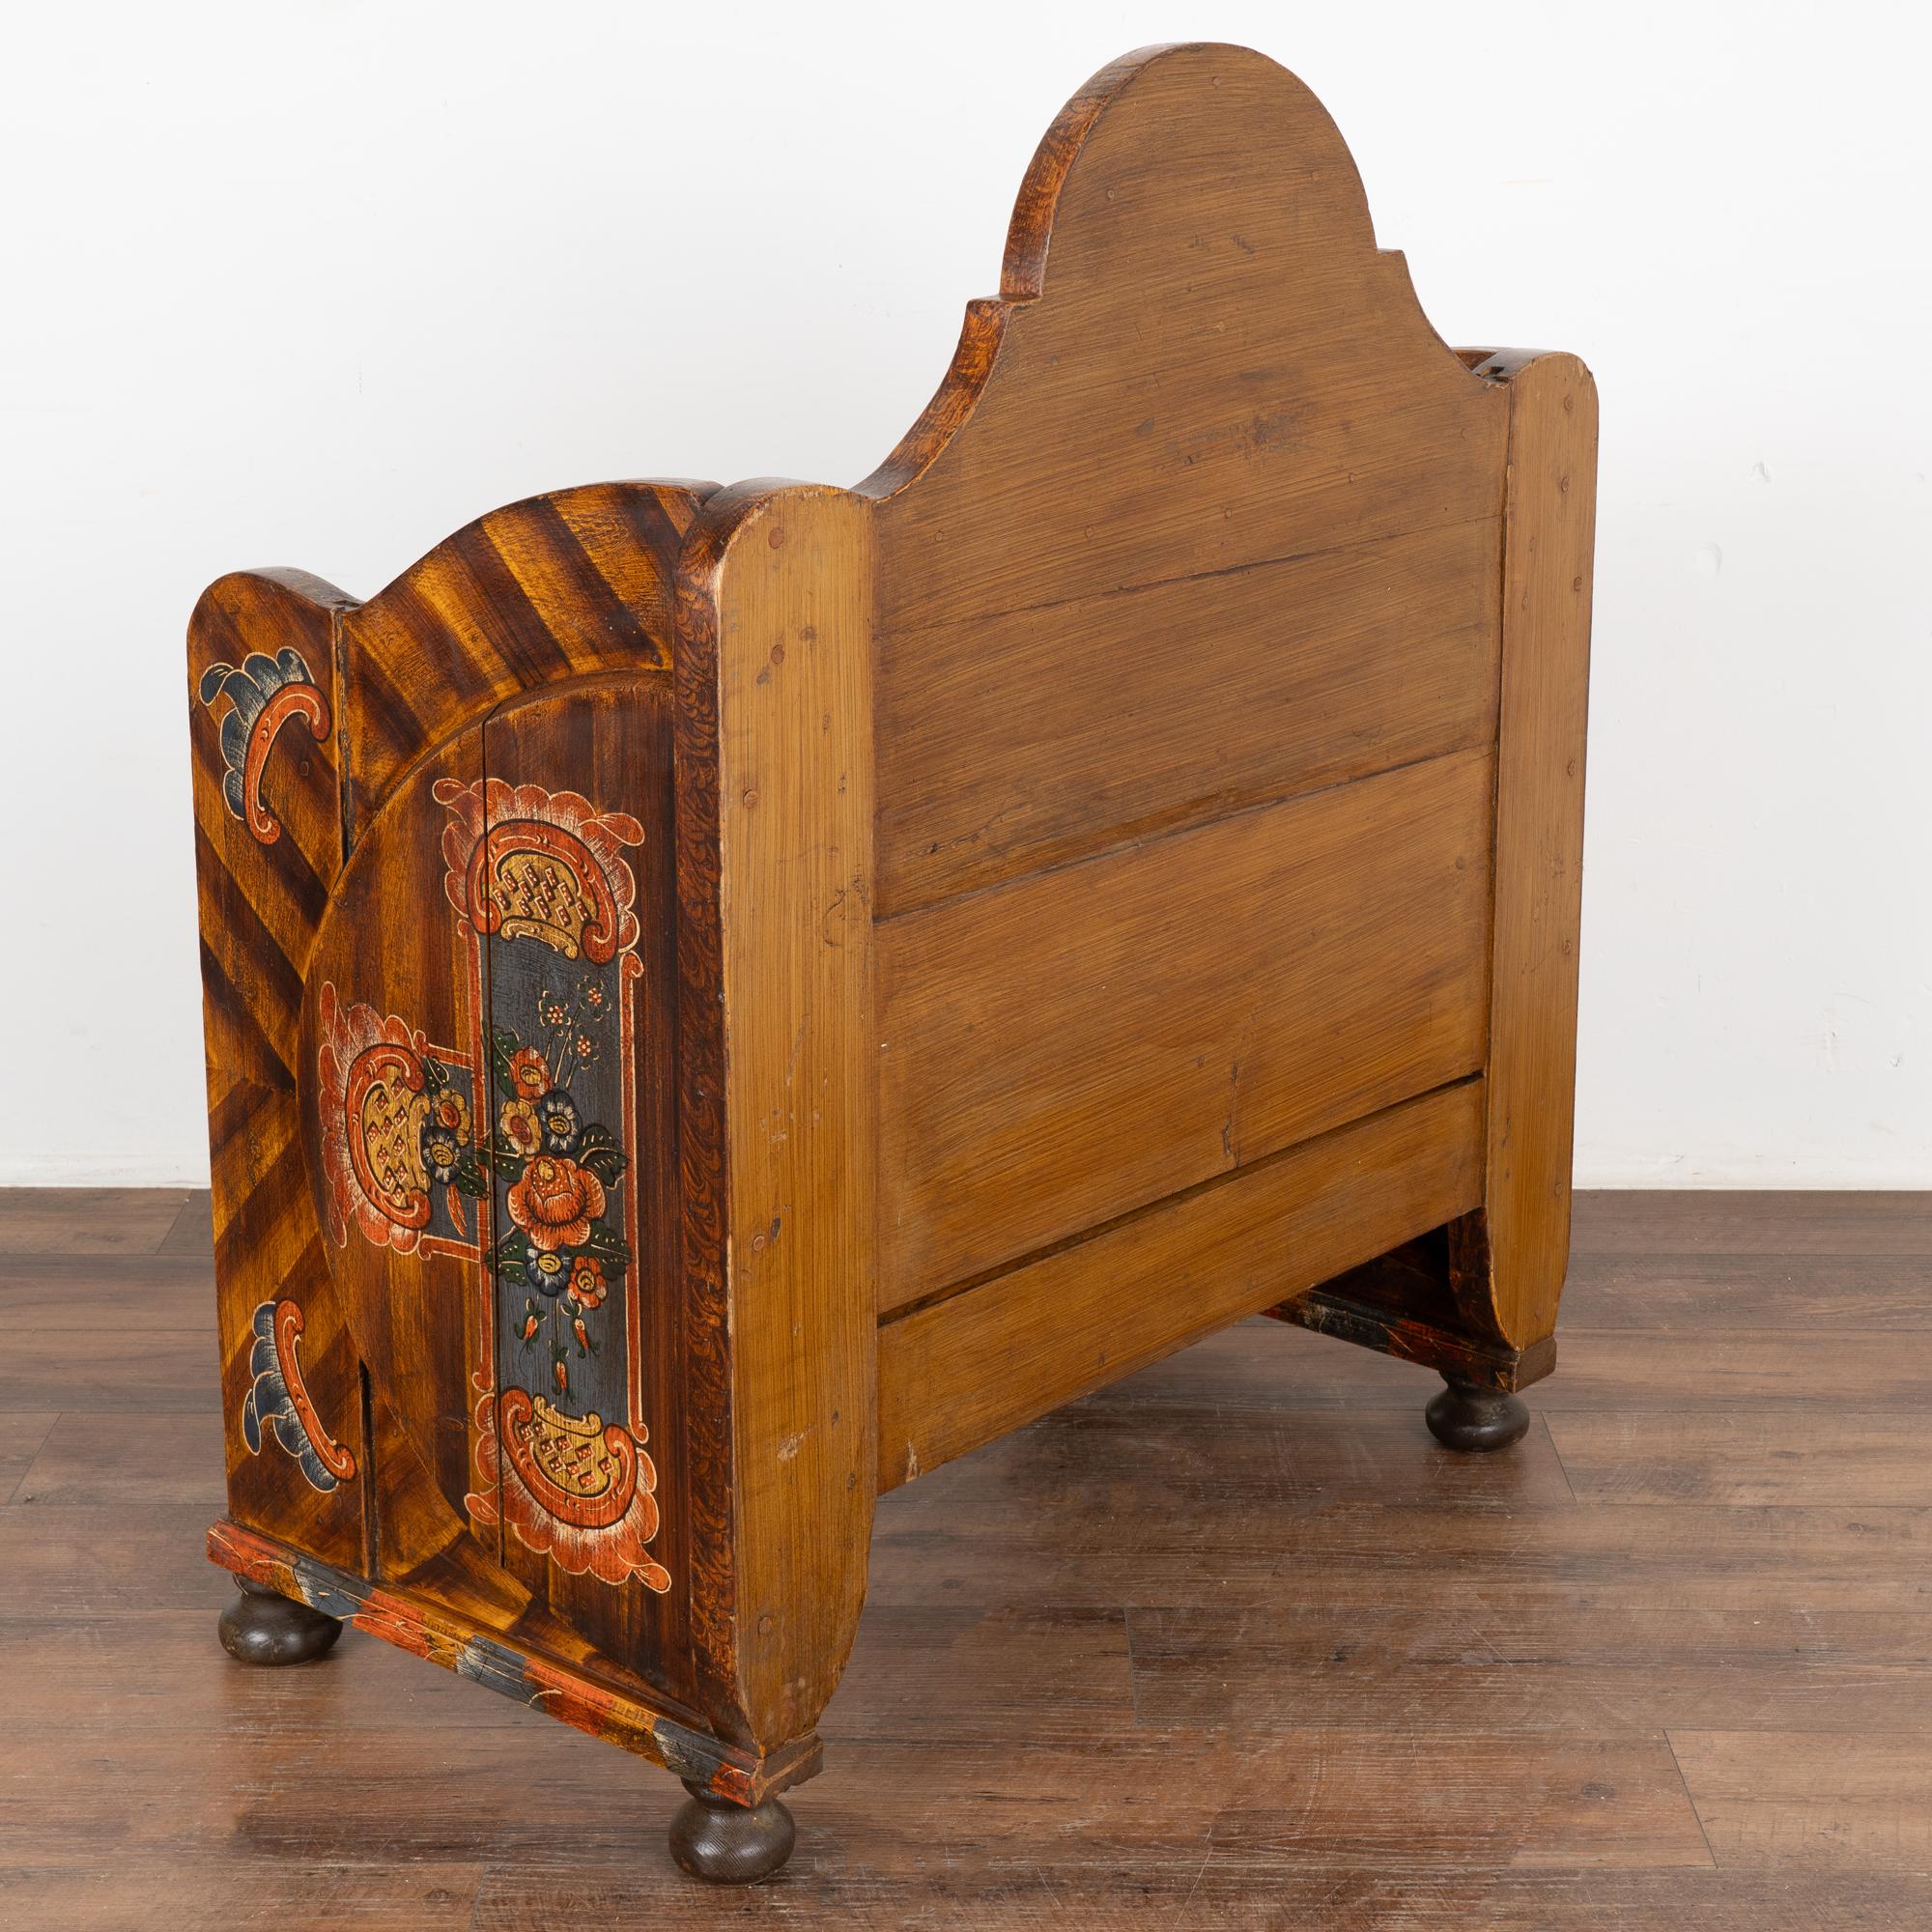 Original Hand Painted Small Bench With High Back, Hungary circa 1860-80 For Sale 3